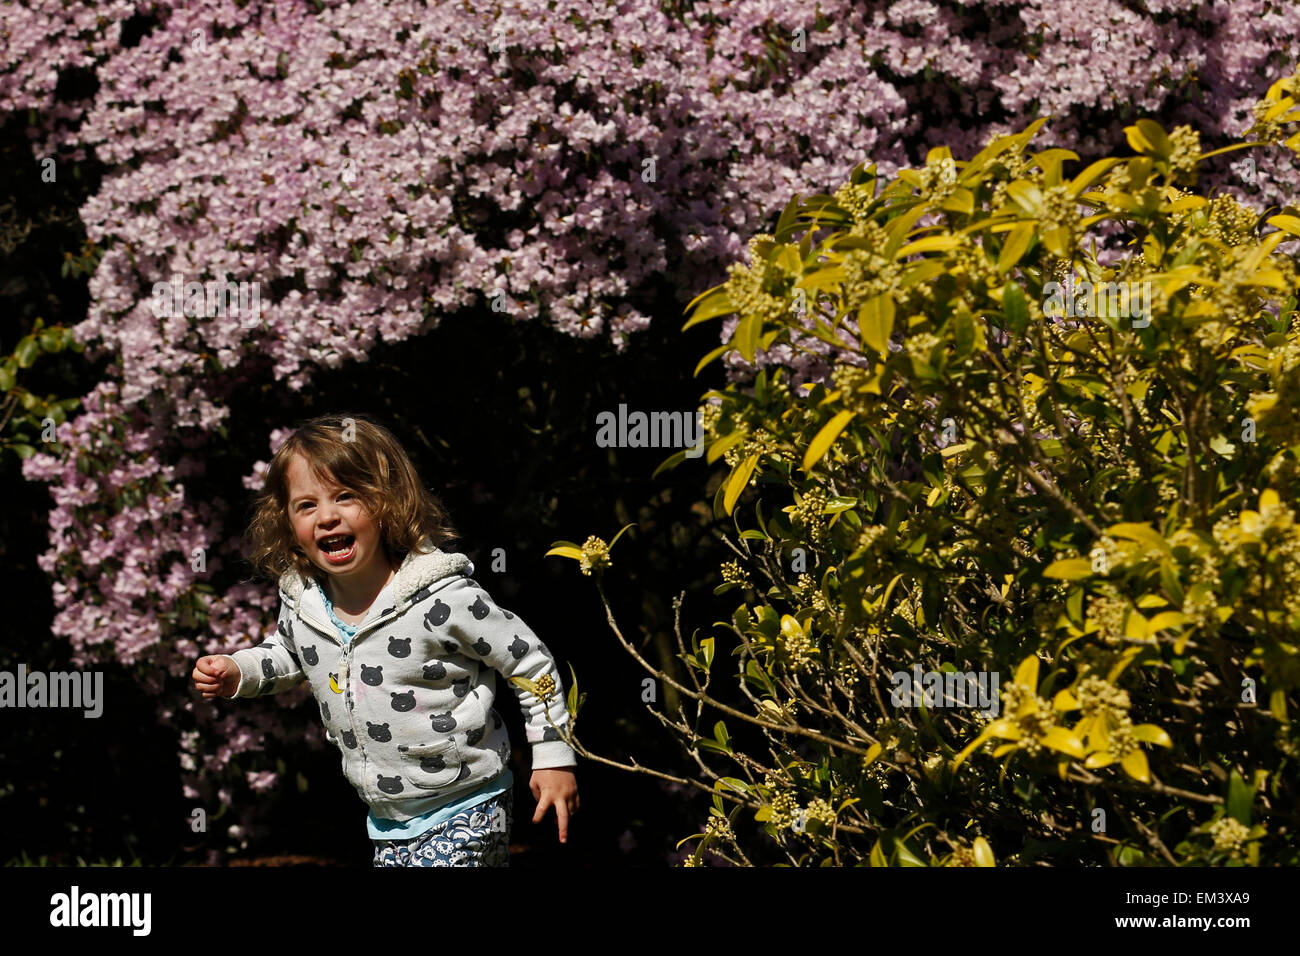 Three year old Lottie plays among flowering shrubs in the hot spring weather at Borde Hill Gardens near Haywards Heath in Sussex Stock Photo